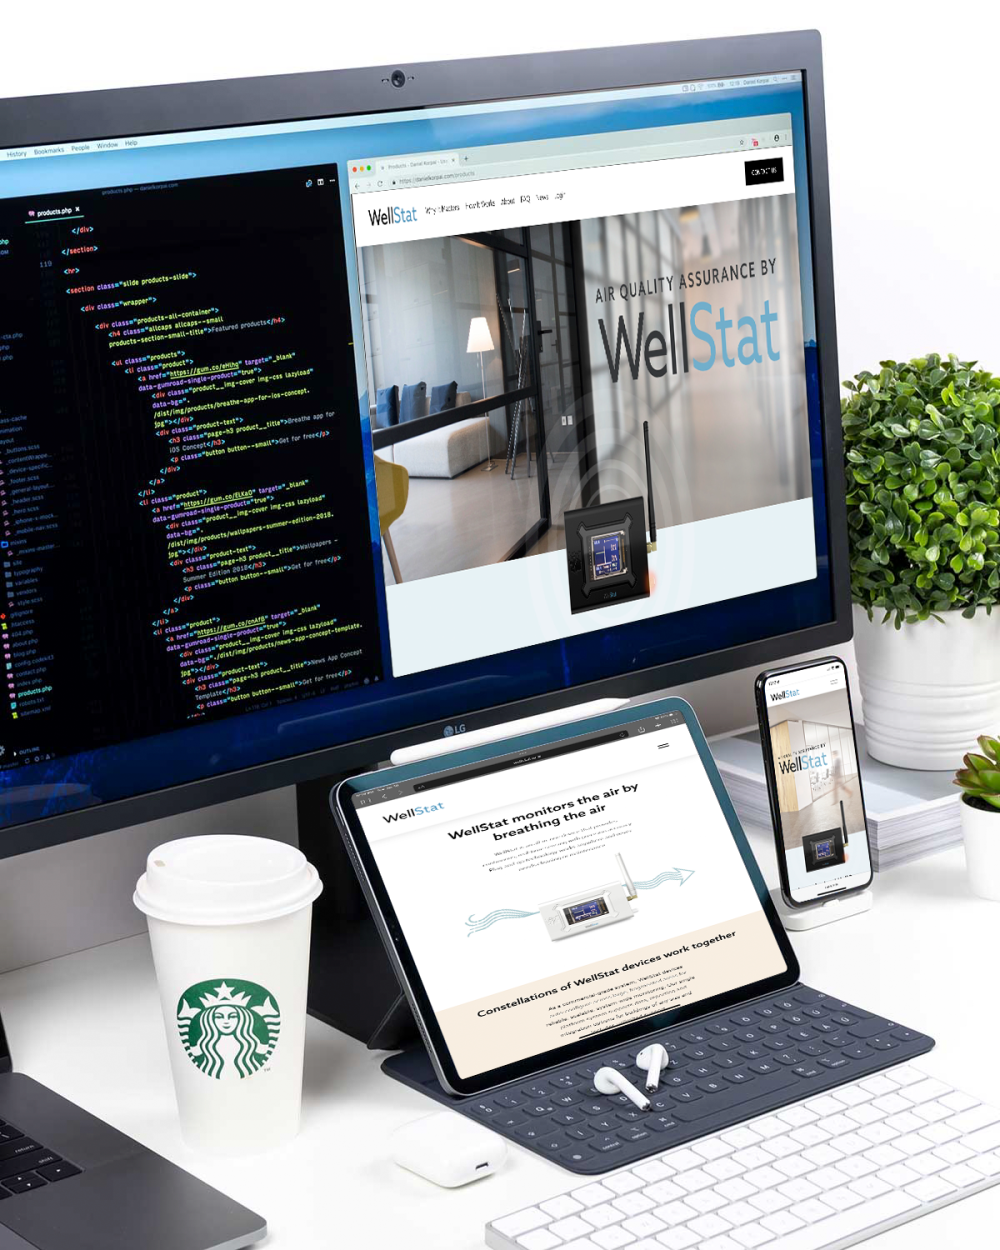 A monitor, laptop, and mobile device displaying a custom website we built for our client WellStat.